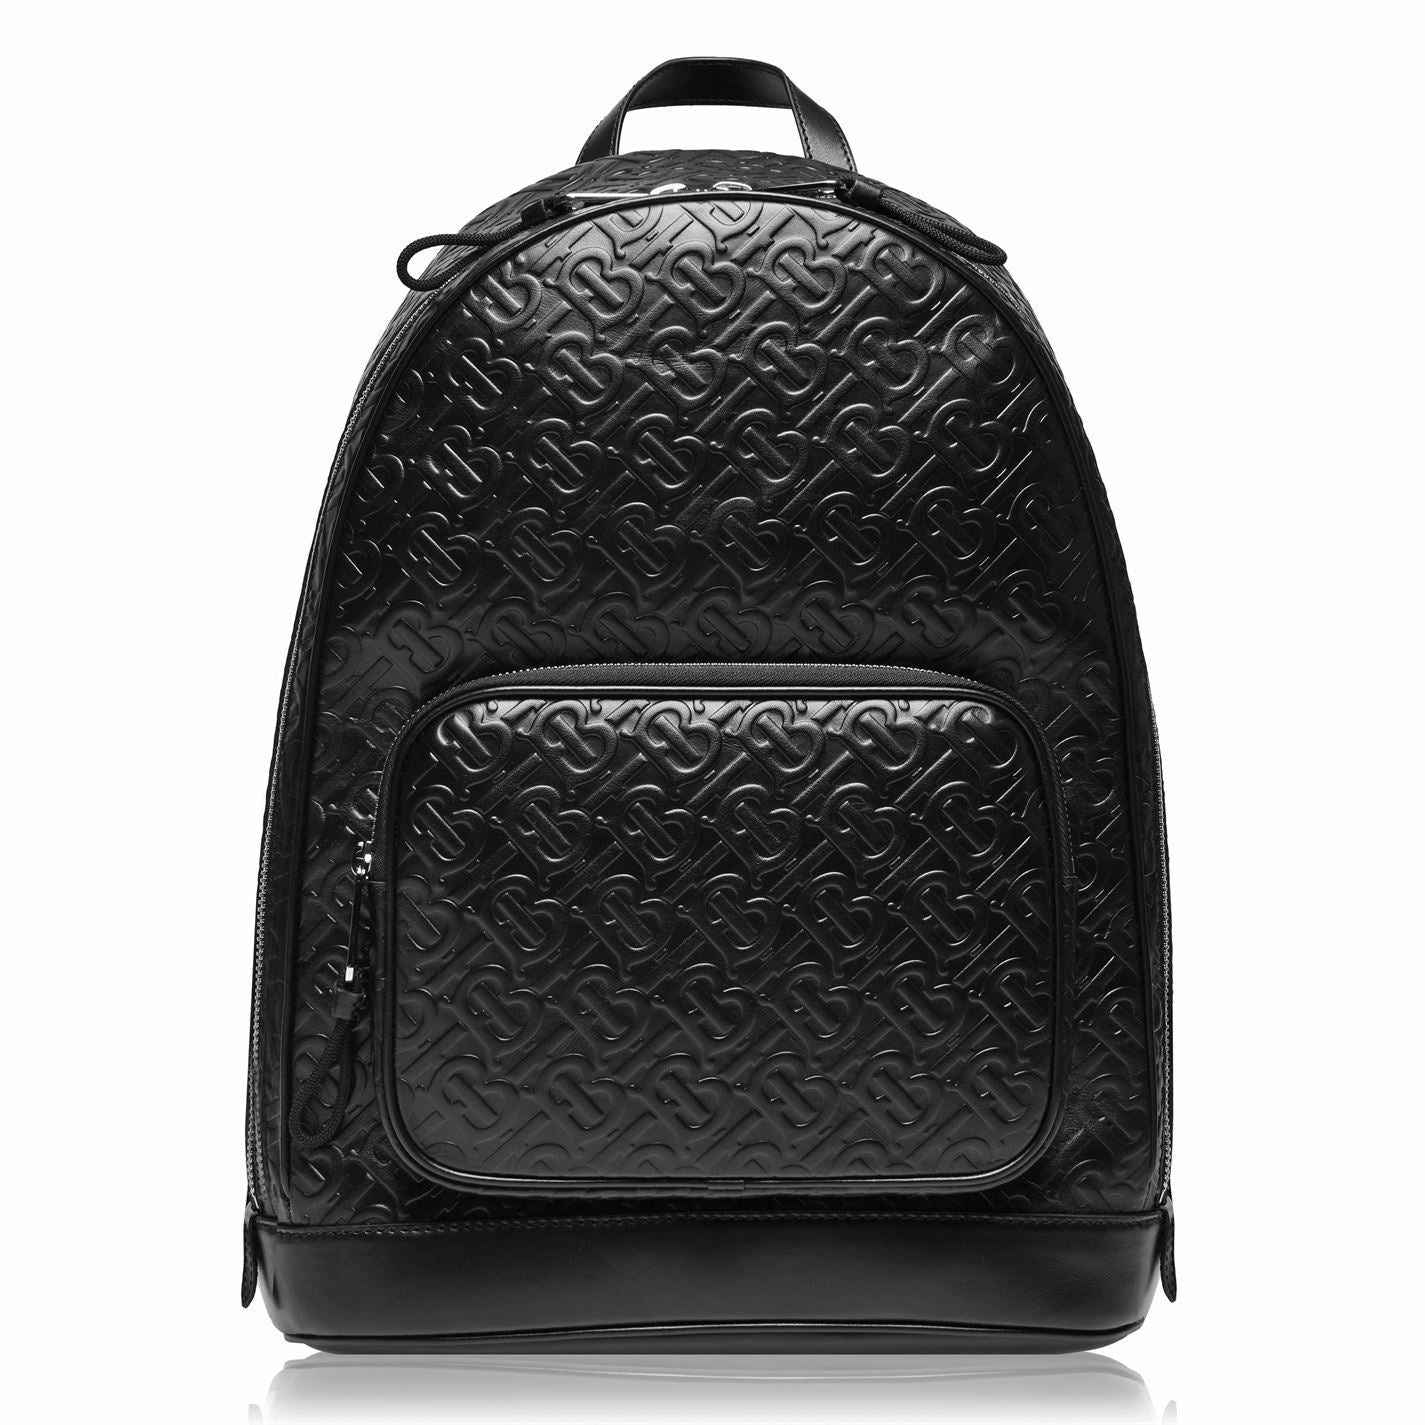 ROCCO BACKPACK